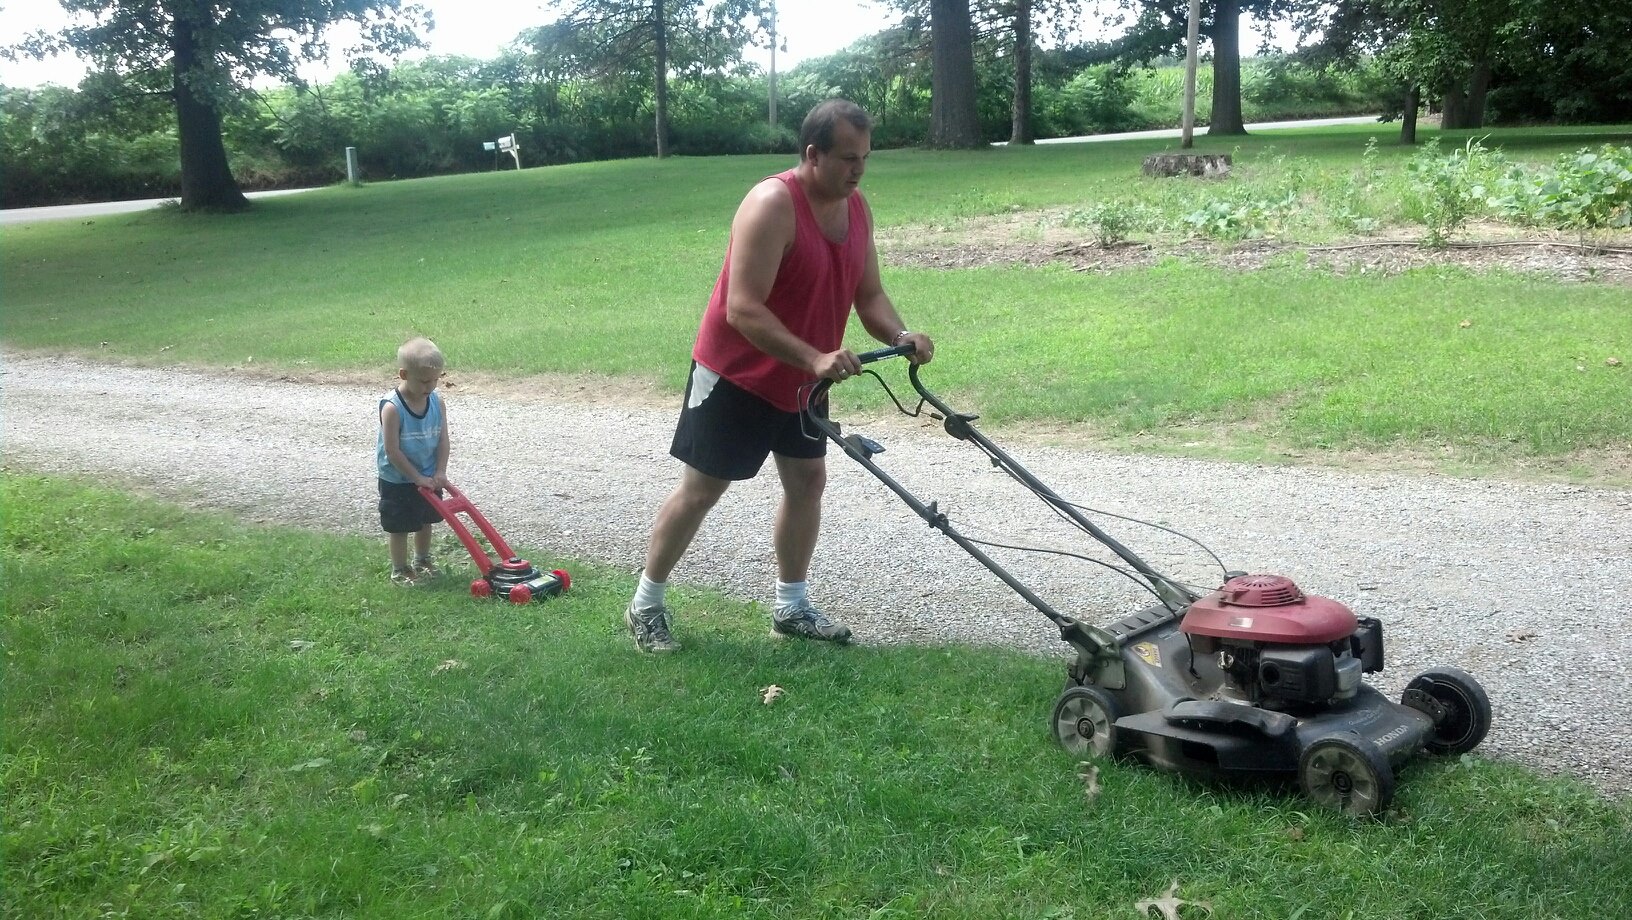 He likes mowing.